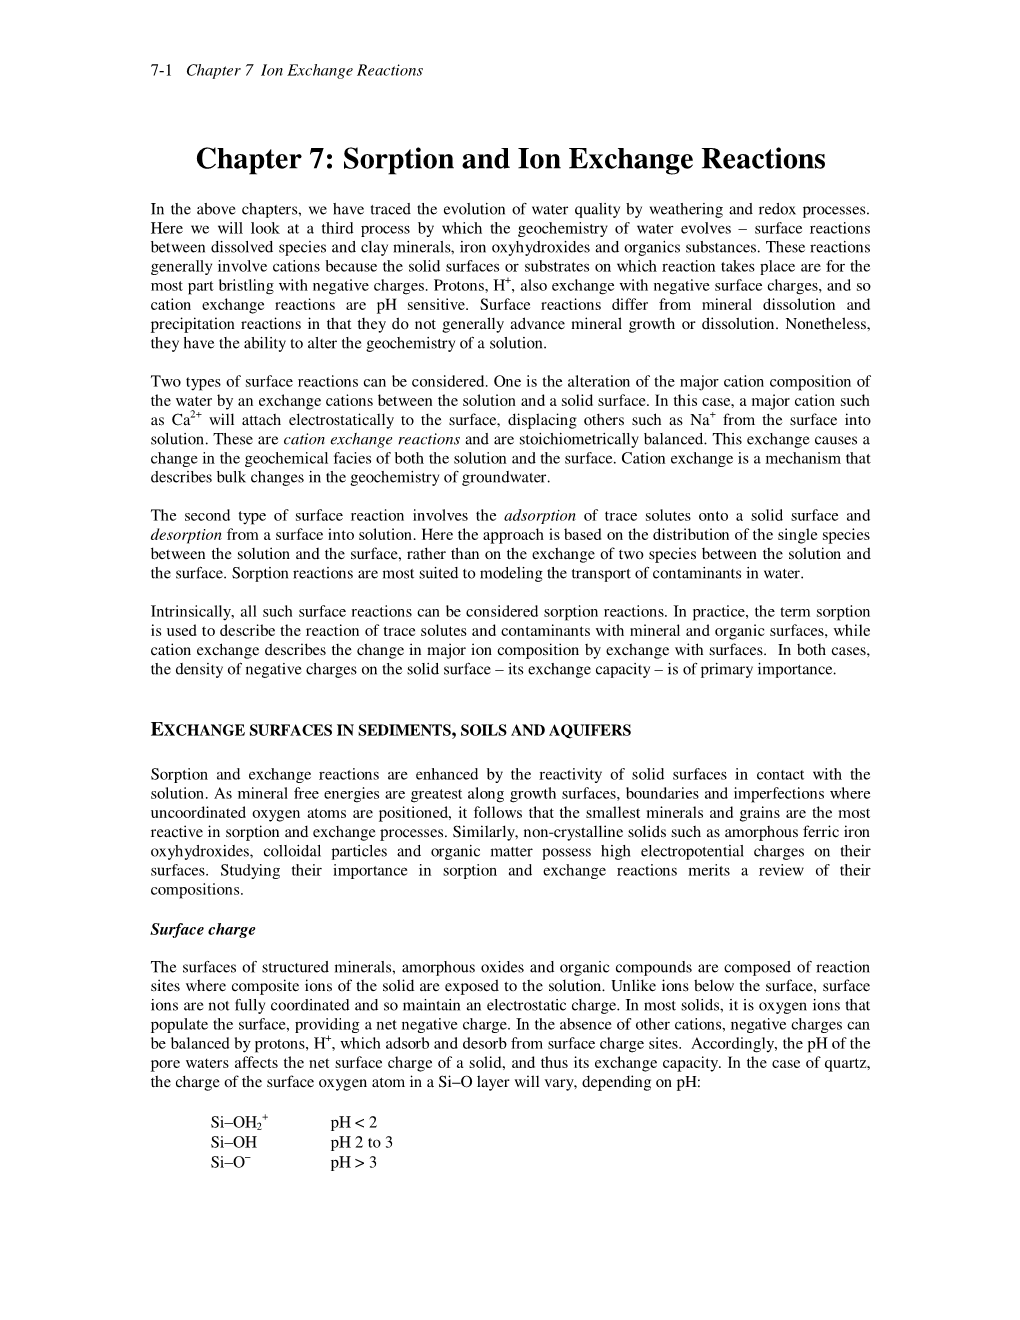 Chapter 7: Sorption and Ion Exchange Reactions